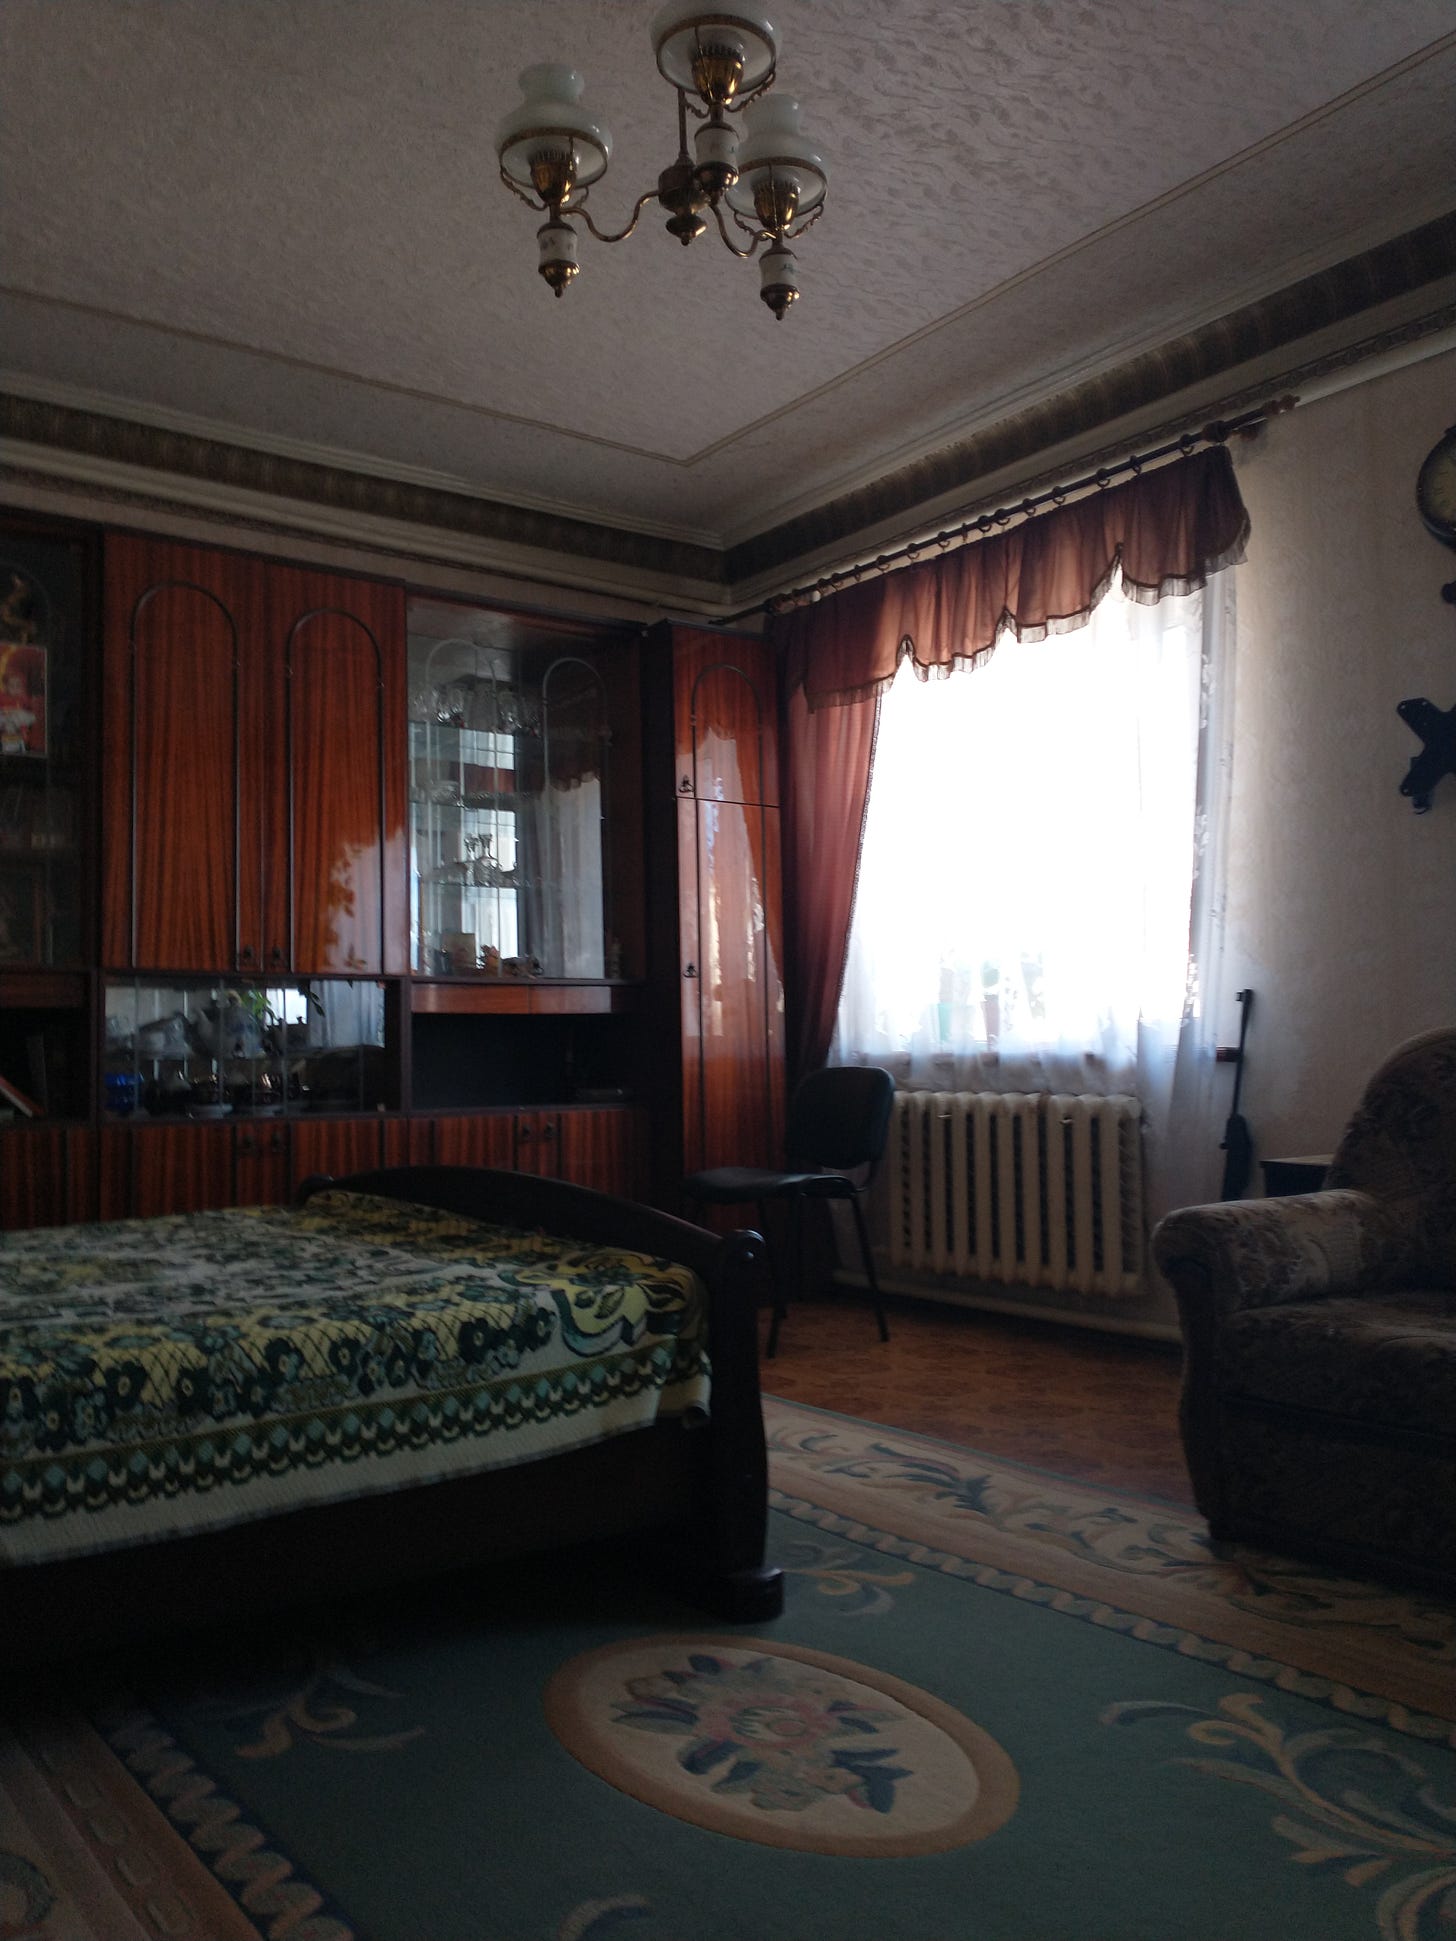 Luda's bedroom. Traditional Ukrainian furnishings and decorative elements adorn a well-lit room. She keeps a loaded rifle by window in case of trouble. 